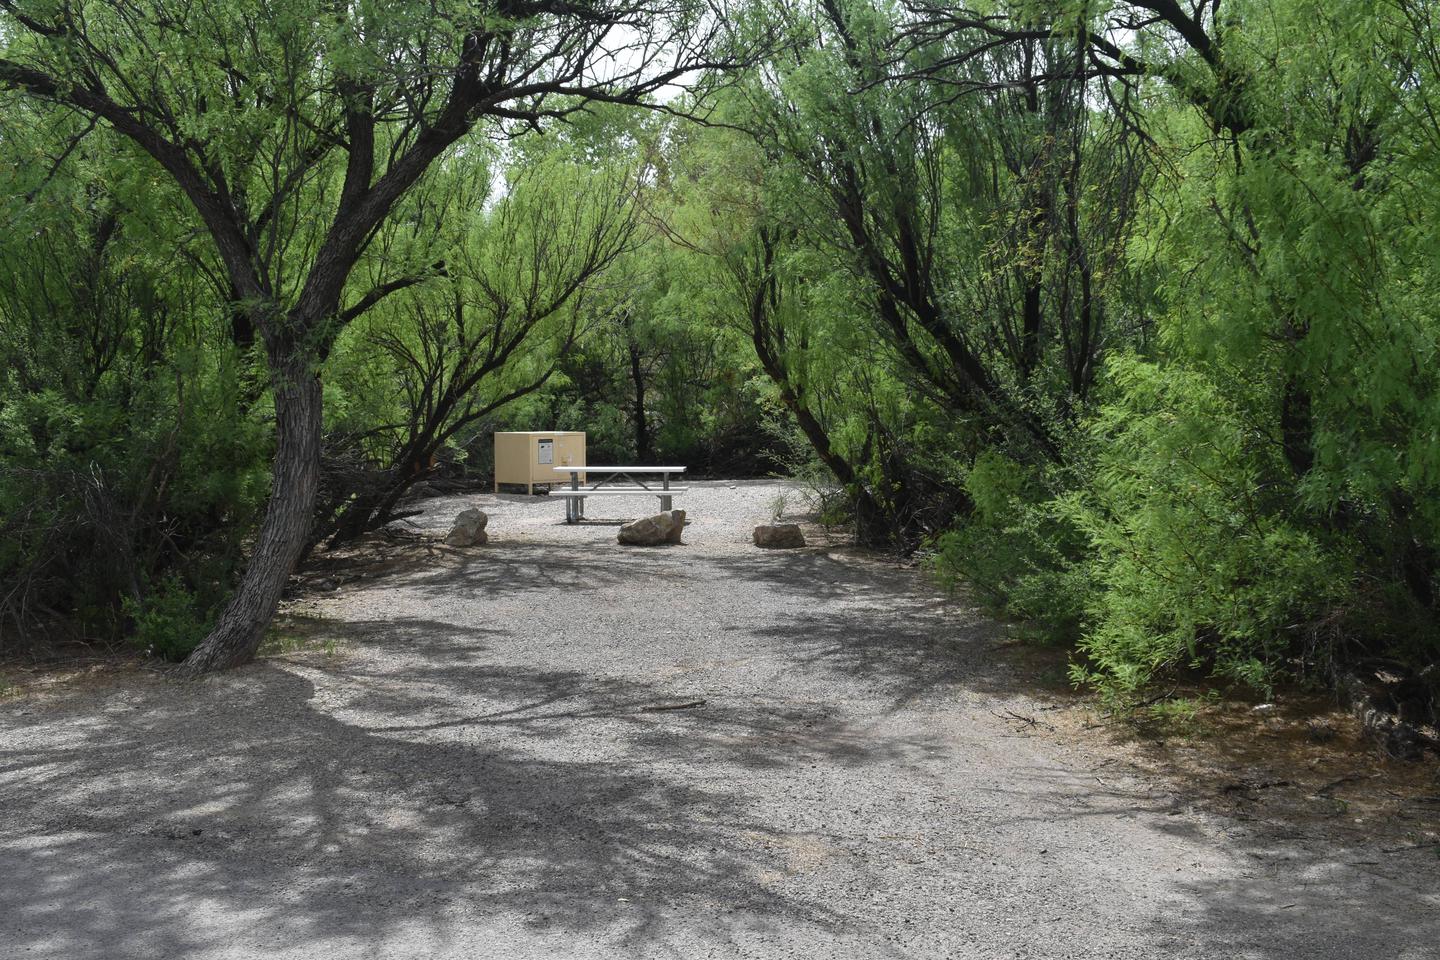 View of the driveway leading into site 31 from the main road. The driveway and campsite are surrounded by large trees and bushes, offering plenty of shade and privacy. Three rocks mark the end of the driveway and the beginning of the main site area. Road view of Site 31